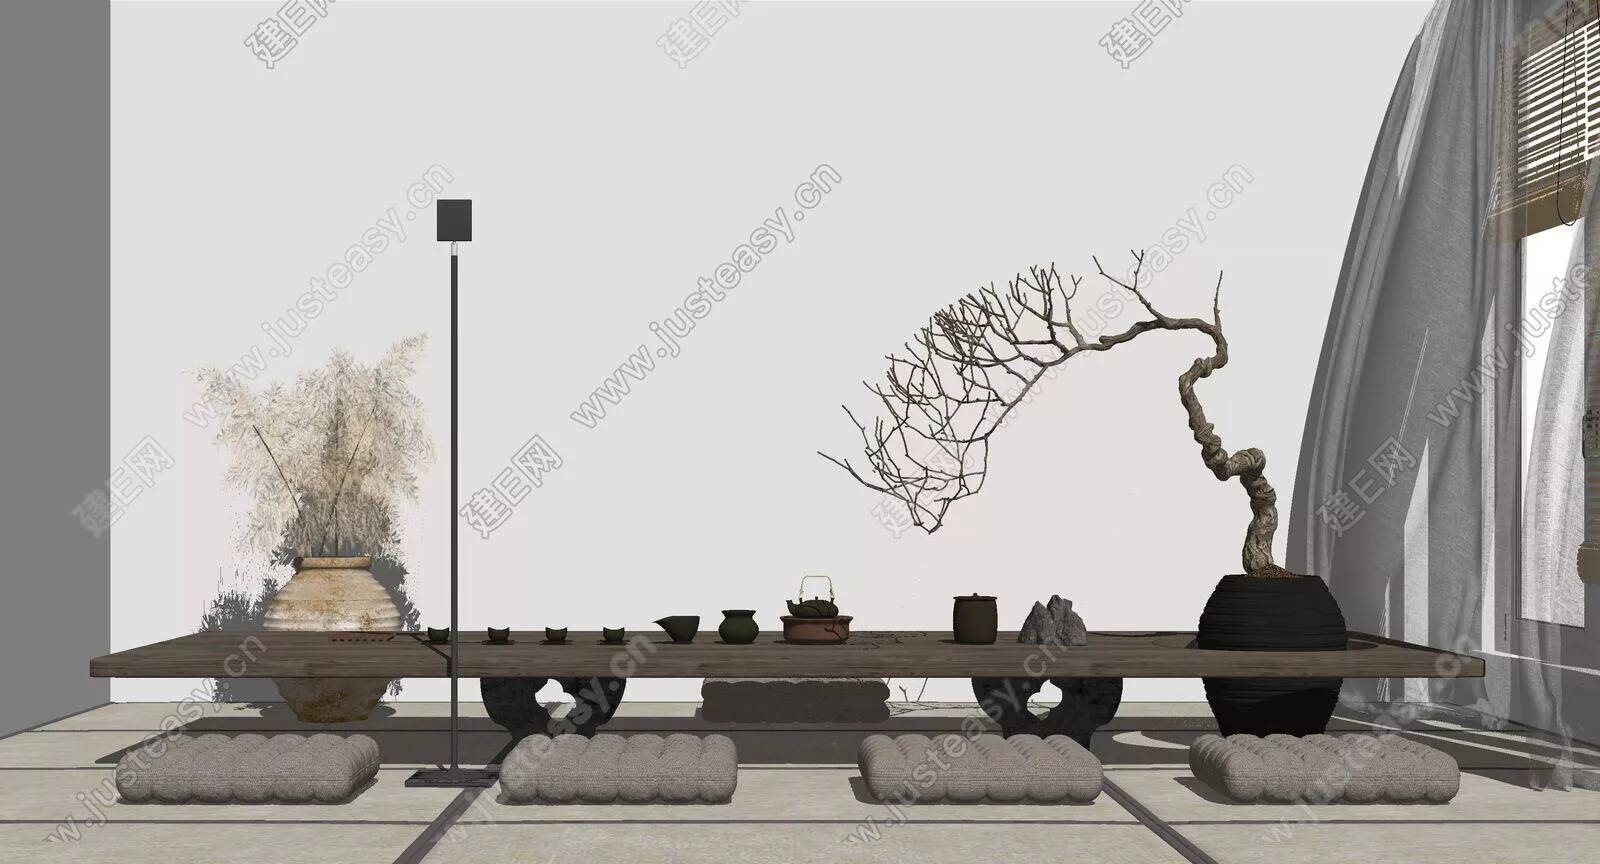 CHINESE TEAROOM - SKETCHUP 3D SCENE - ENSCAPE - 116147610